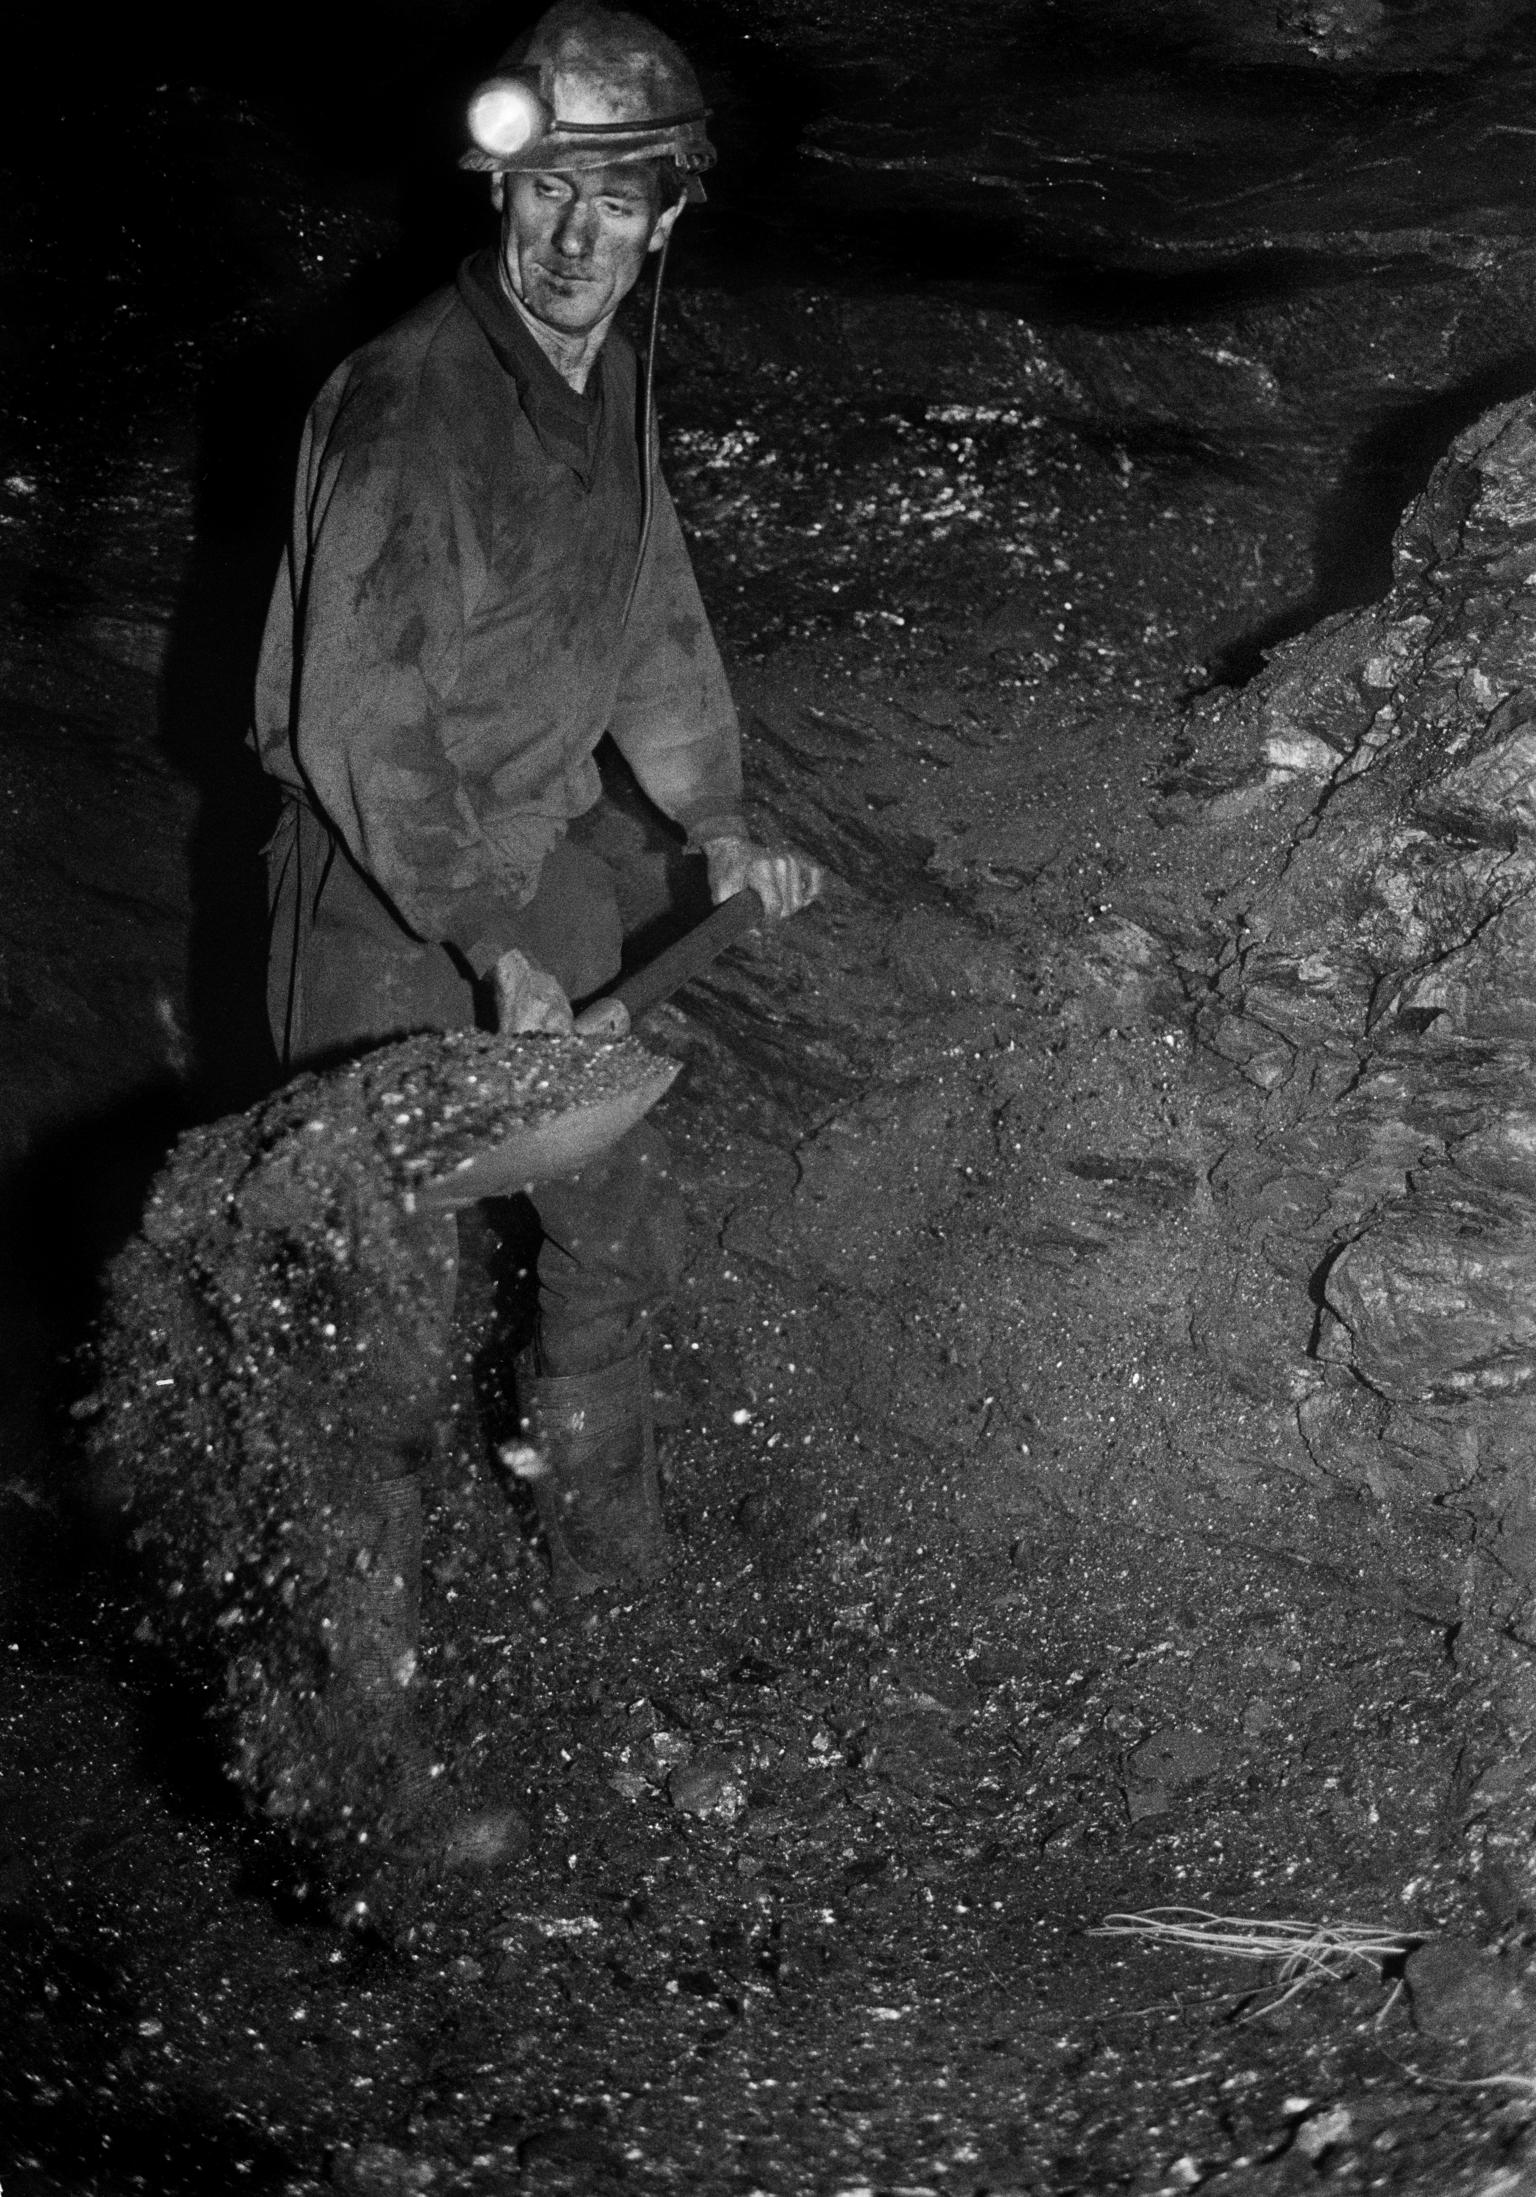 Black mountain coal. Miner hand loading coal - up to 7 tons a day. Neath Valley, Wales